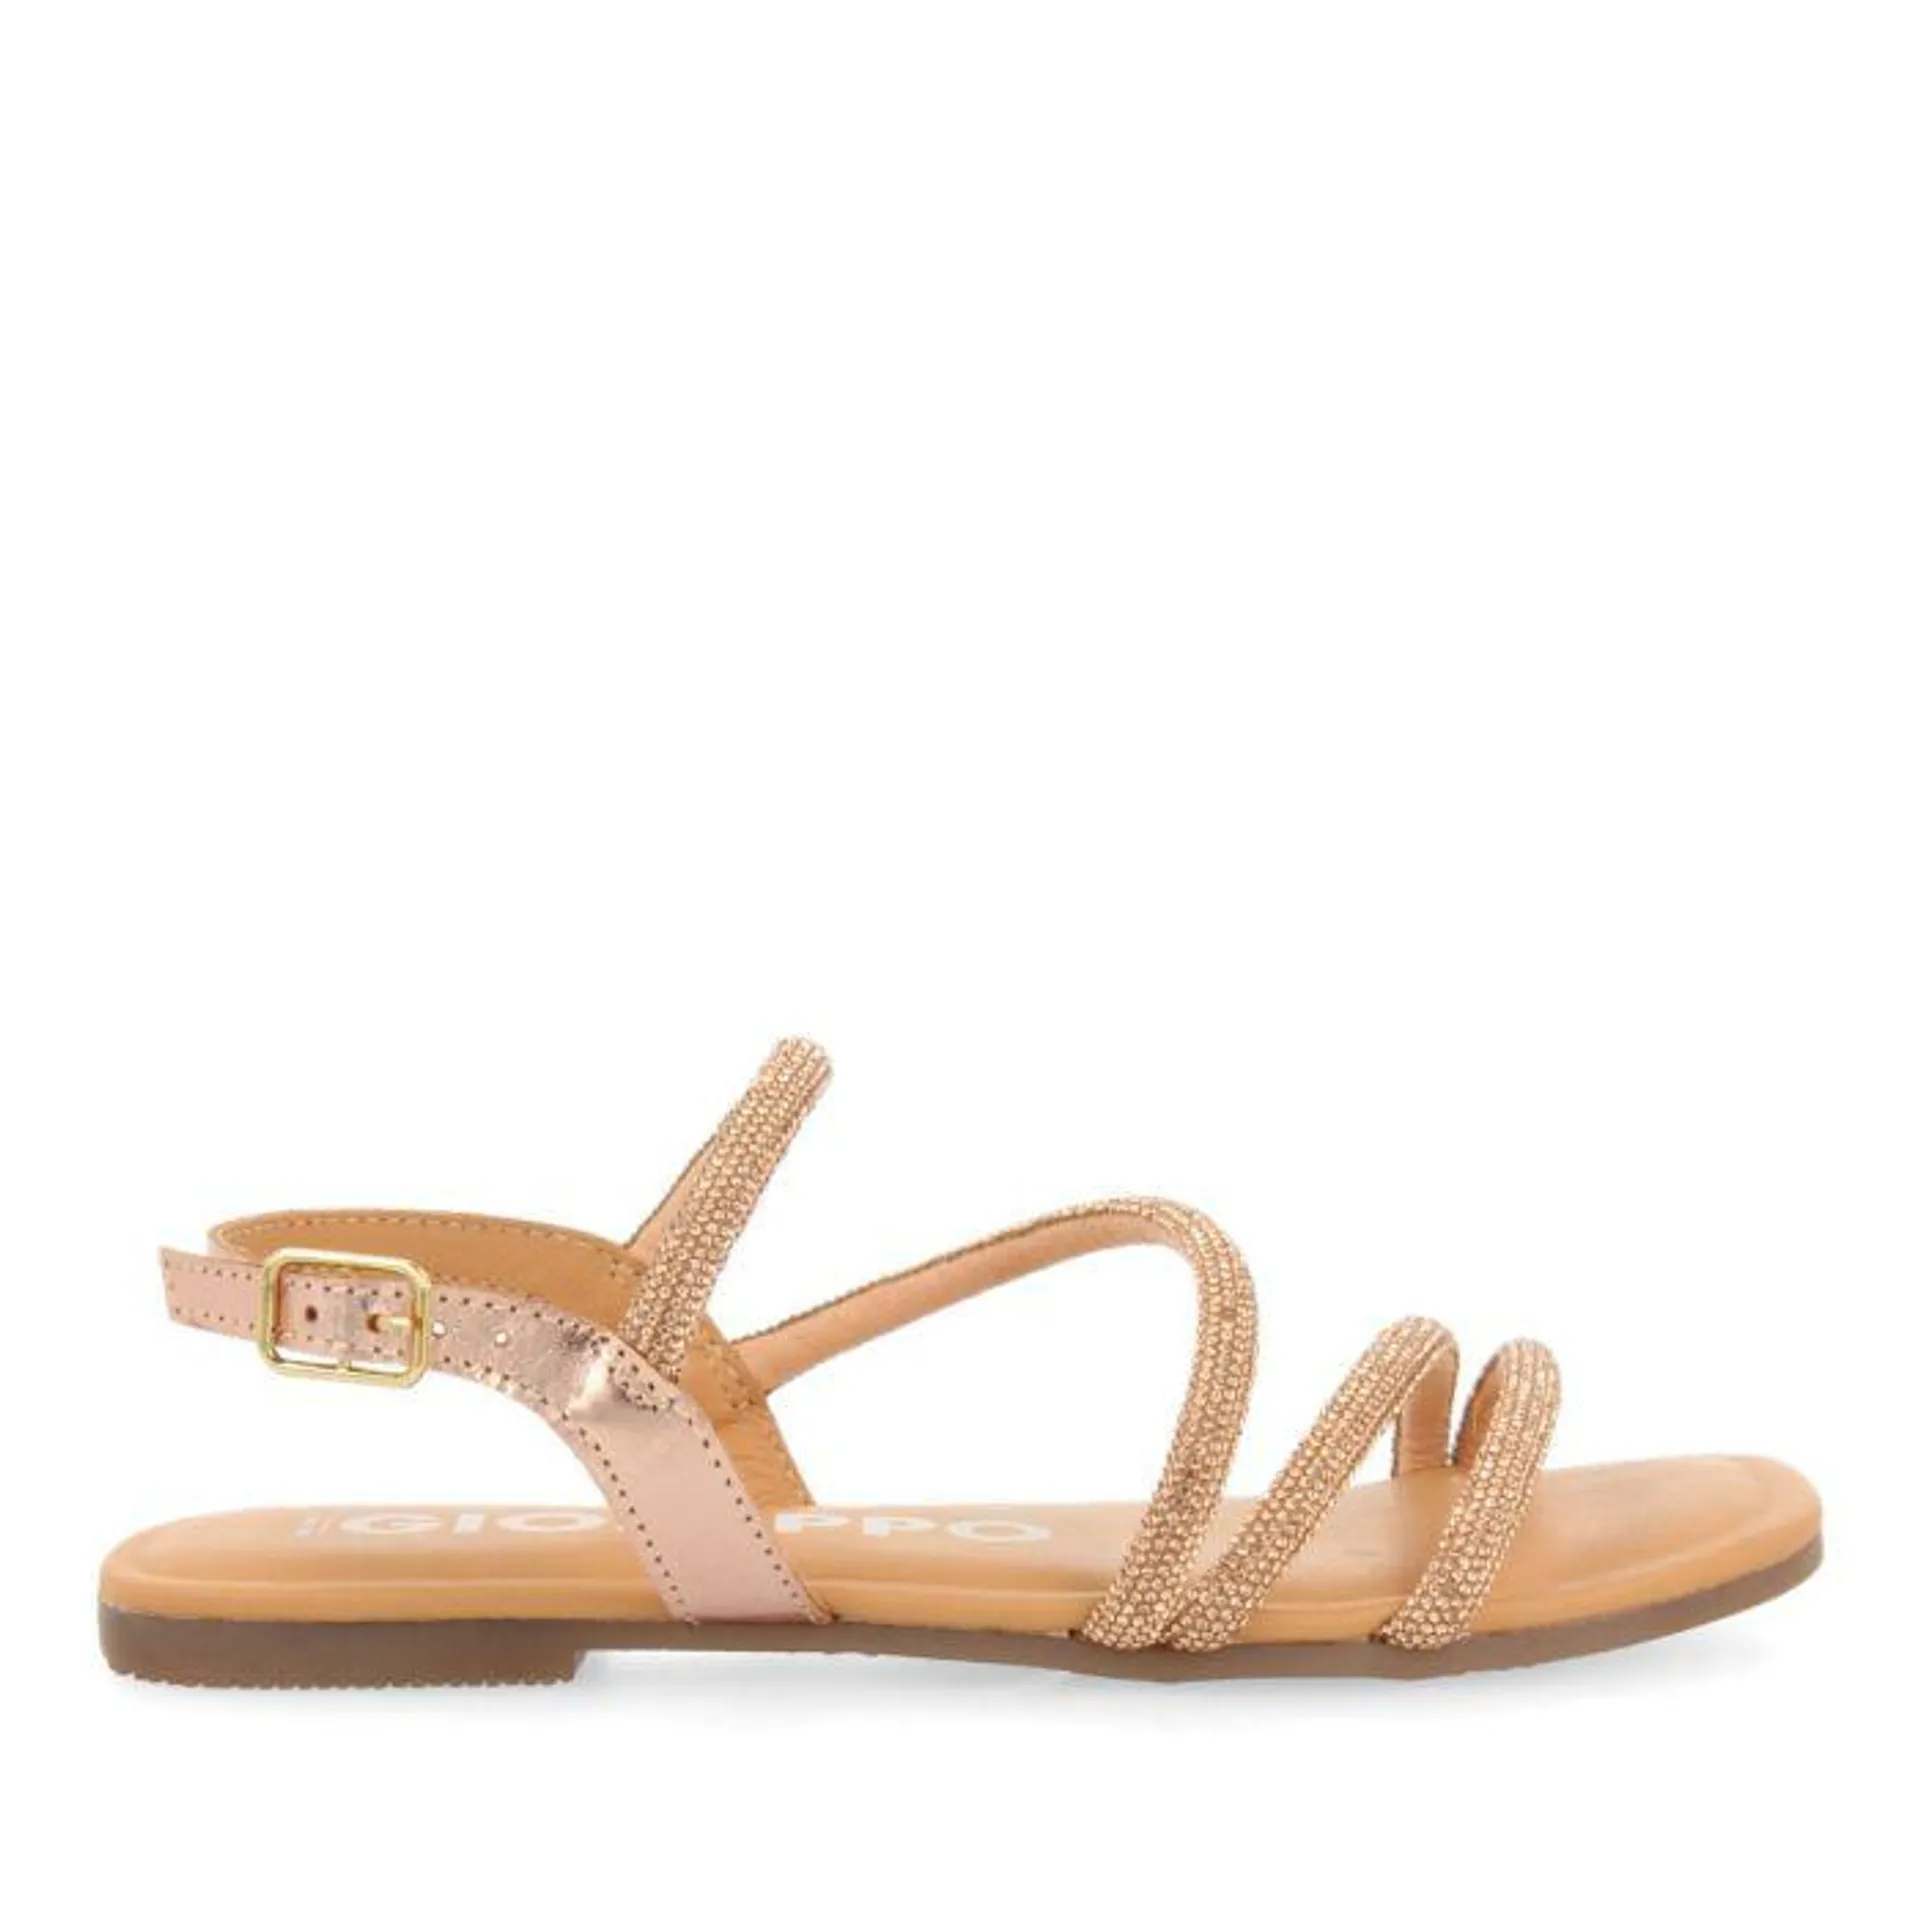 Jeceaba women's rose gold sandals with crystal straps